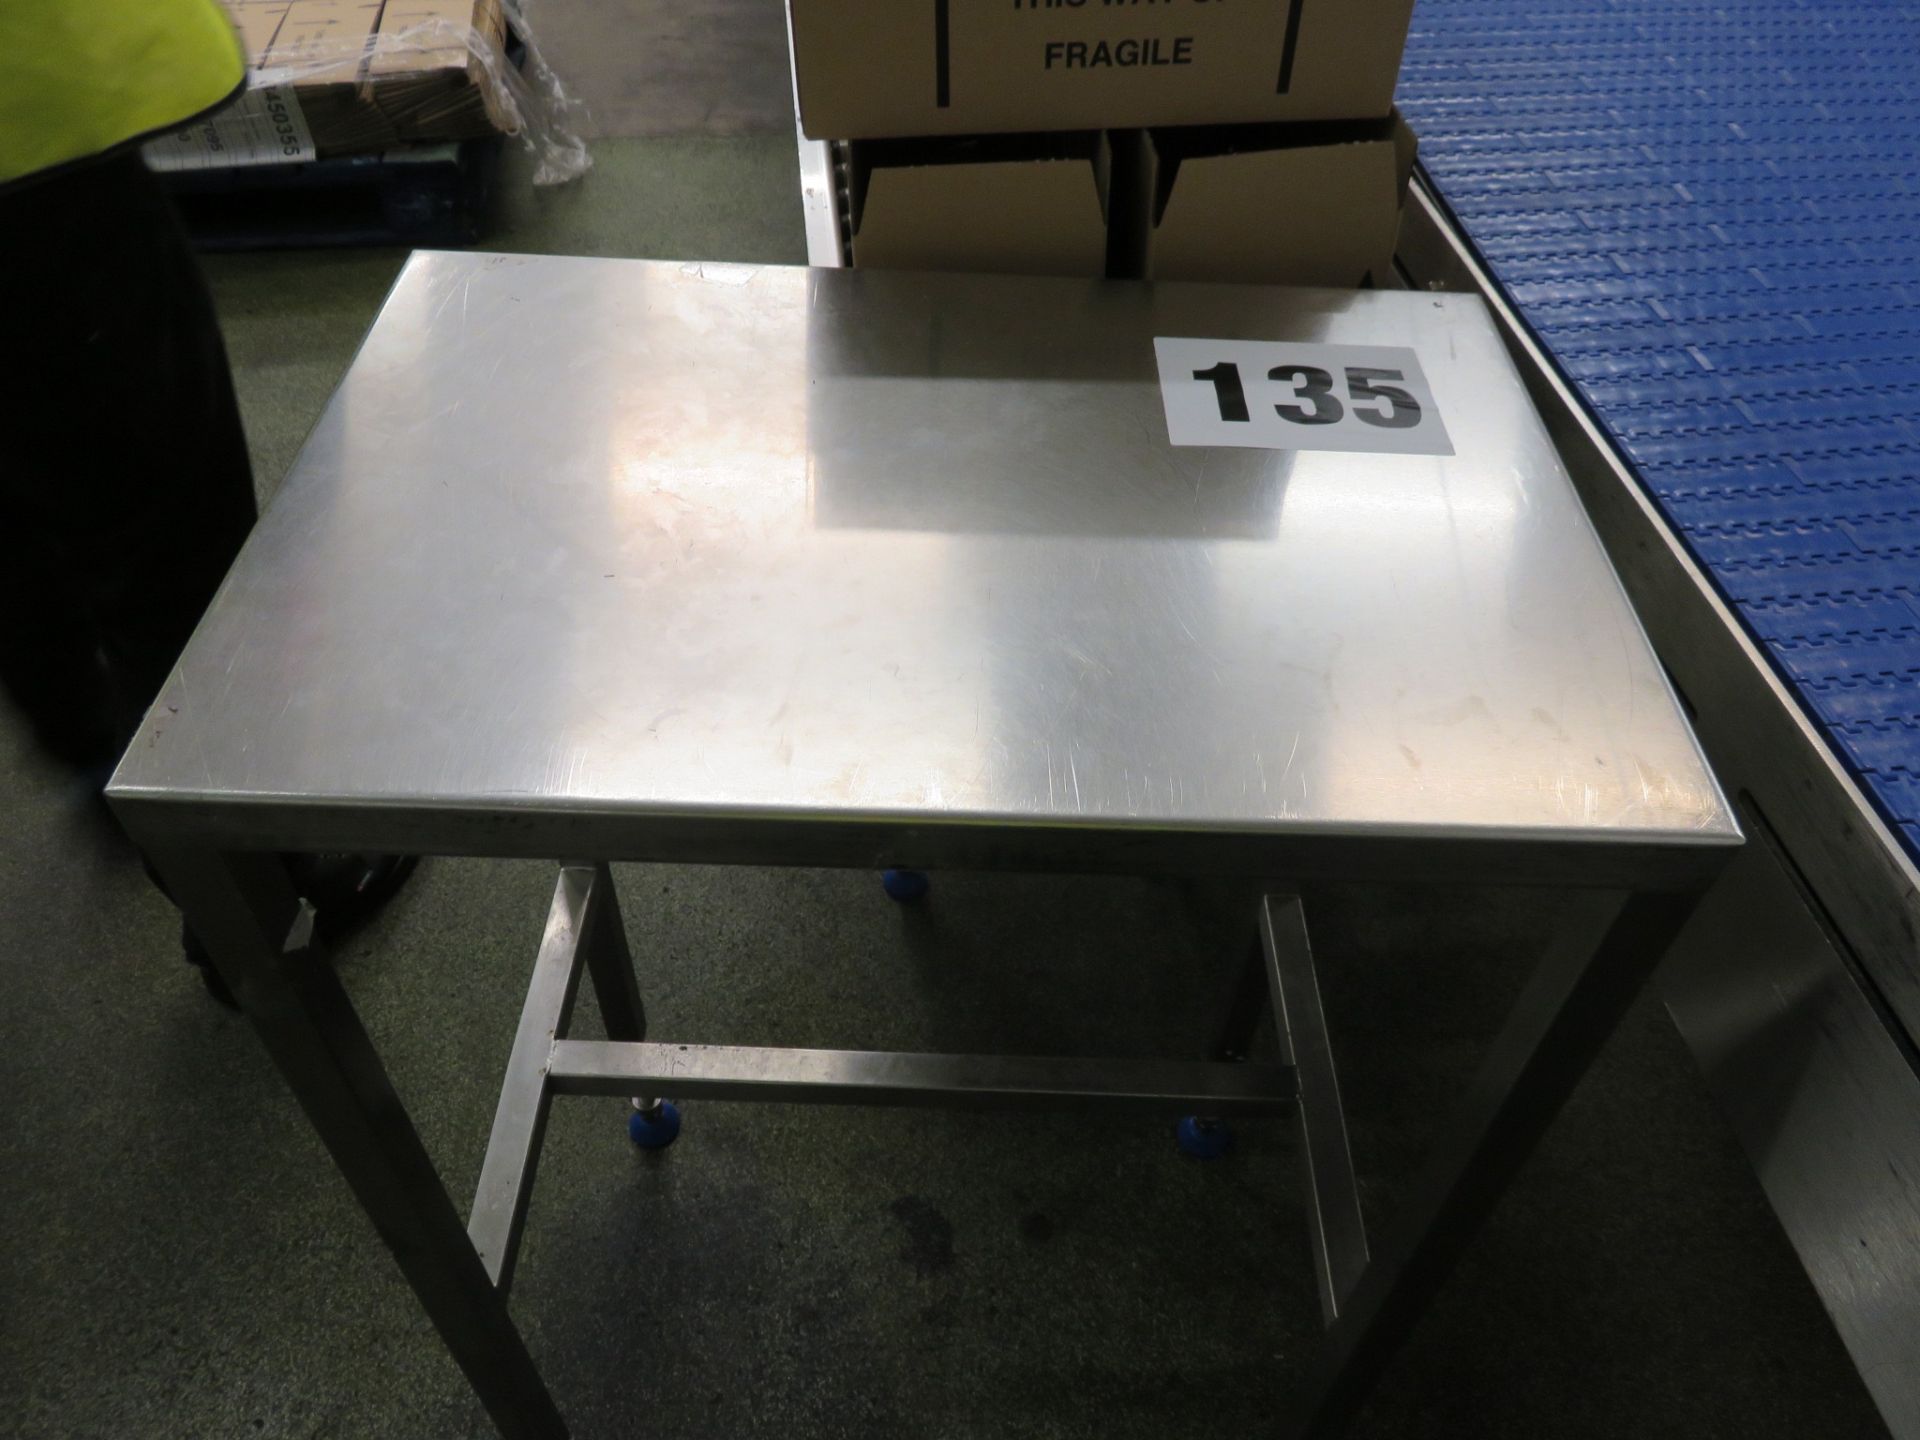 S/s Table. Approx. 600mm x 400mm. Lift out £10